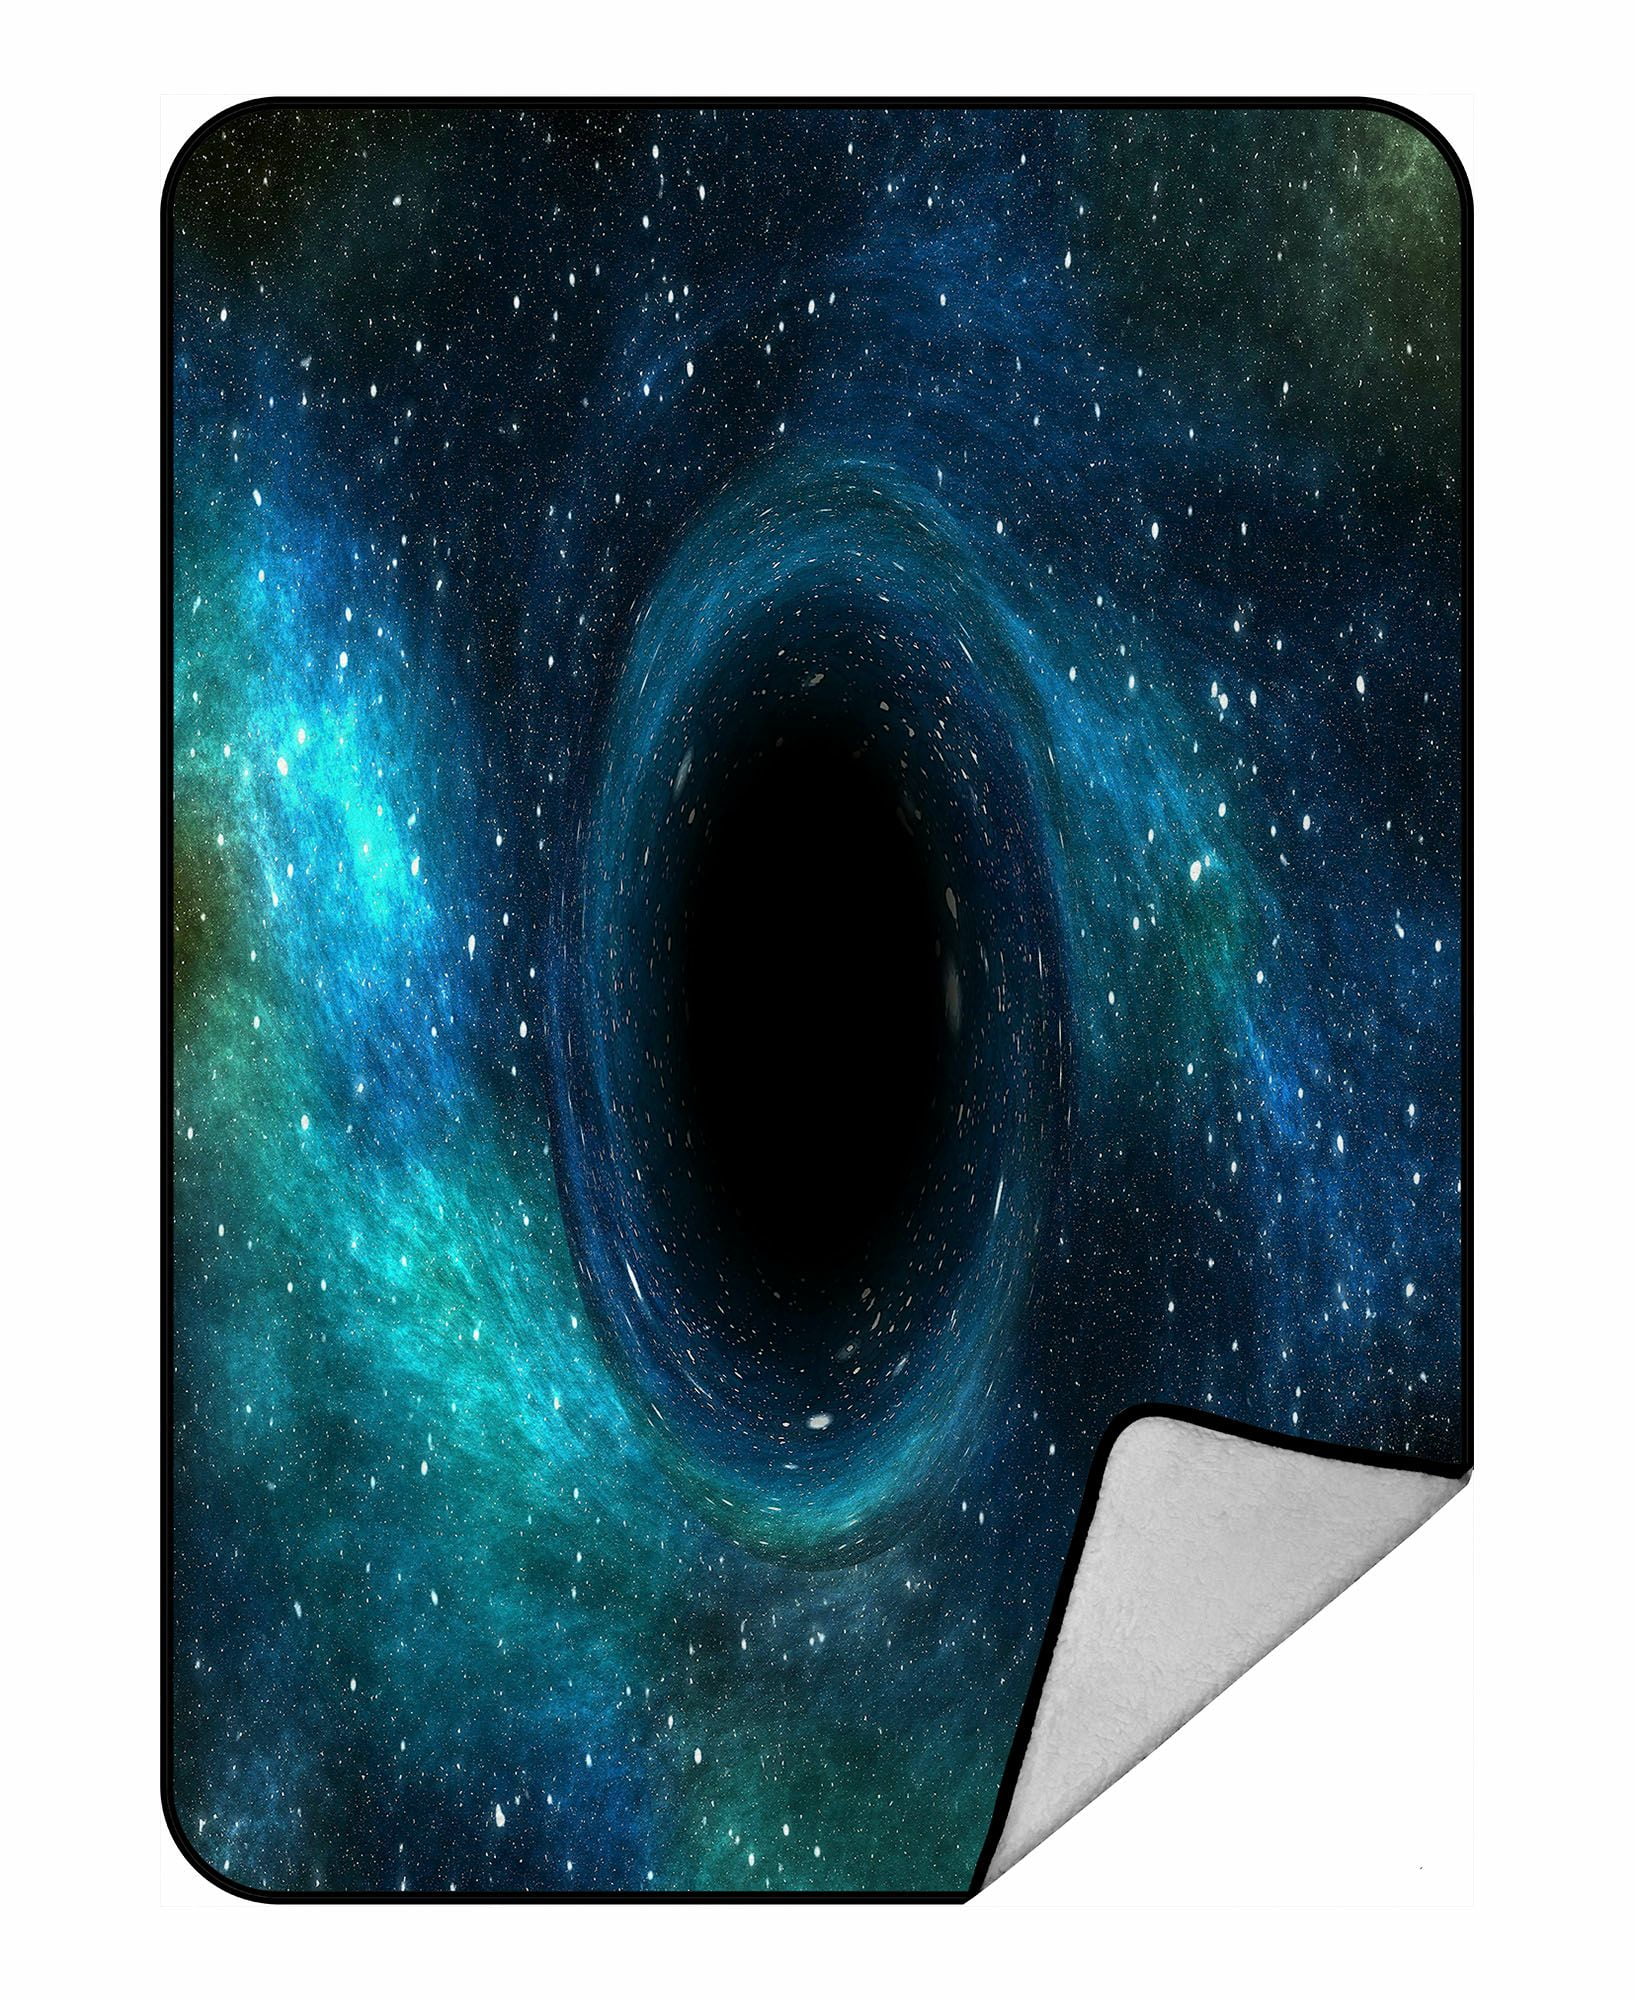 Cozy Plush for Indoor and Outdoor Use Navy Purple Lunarable Outer Space Soft Flannel Fleece Throw Blanket Black Hole in The Nebula Gas Cloud in Outer Space Universe Astro Solar System 60 x 80